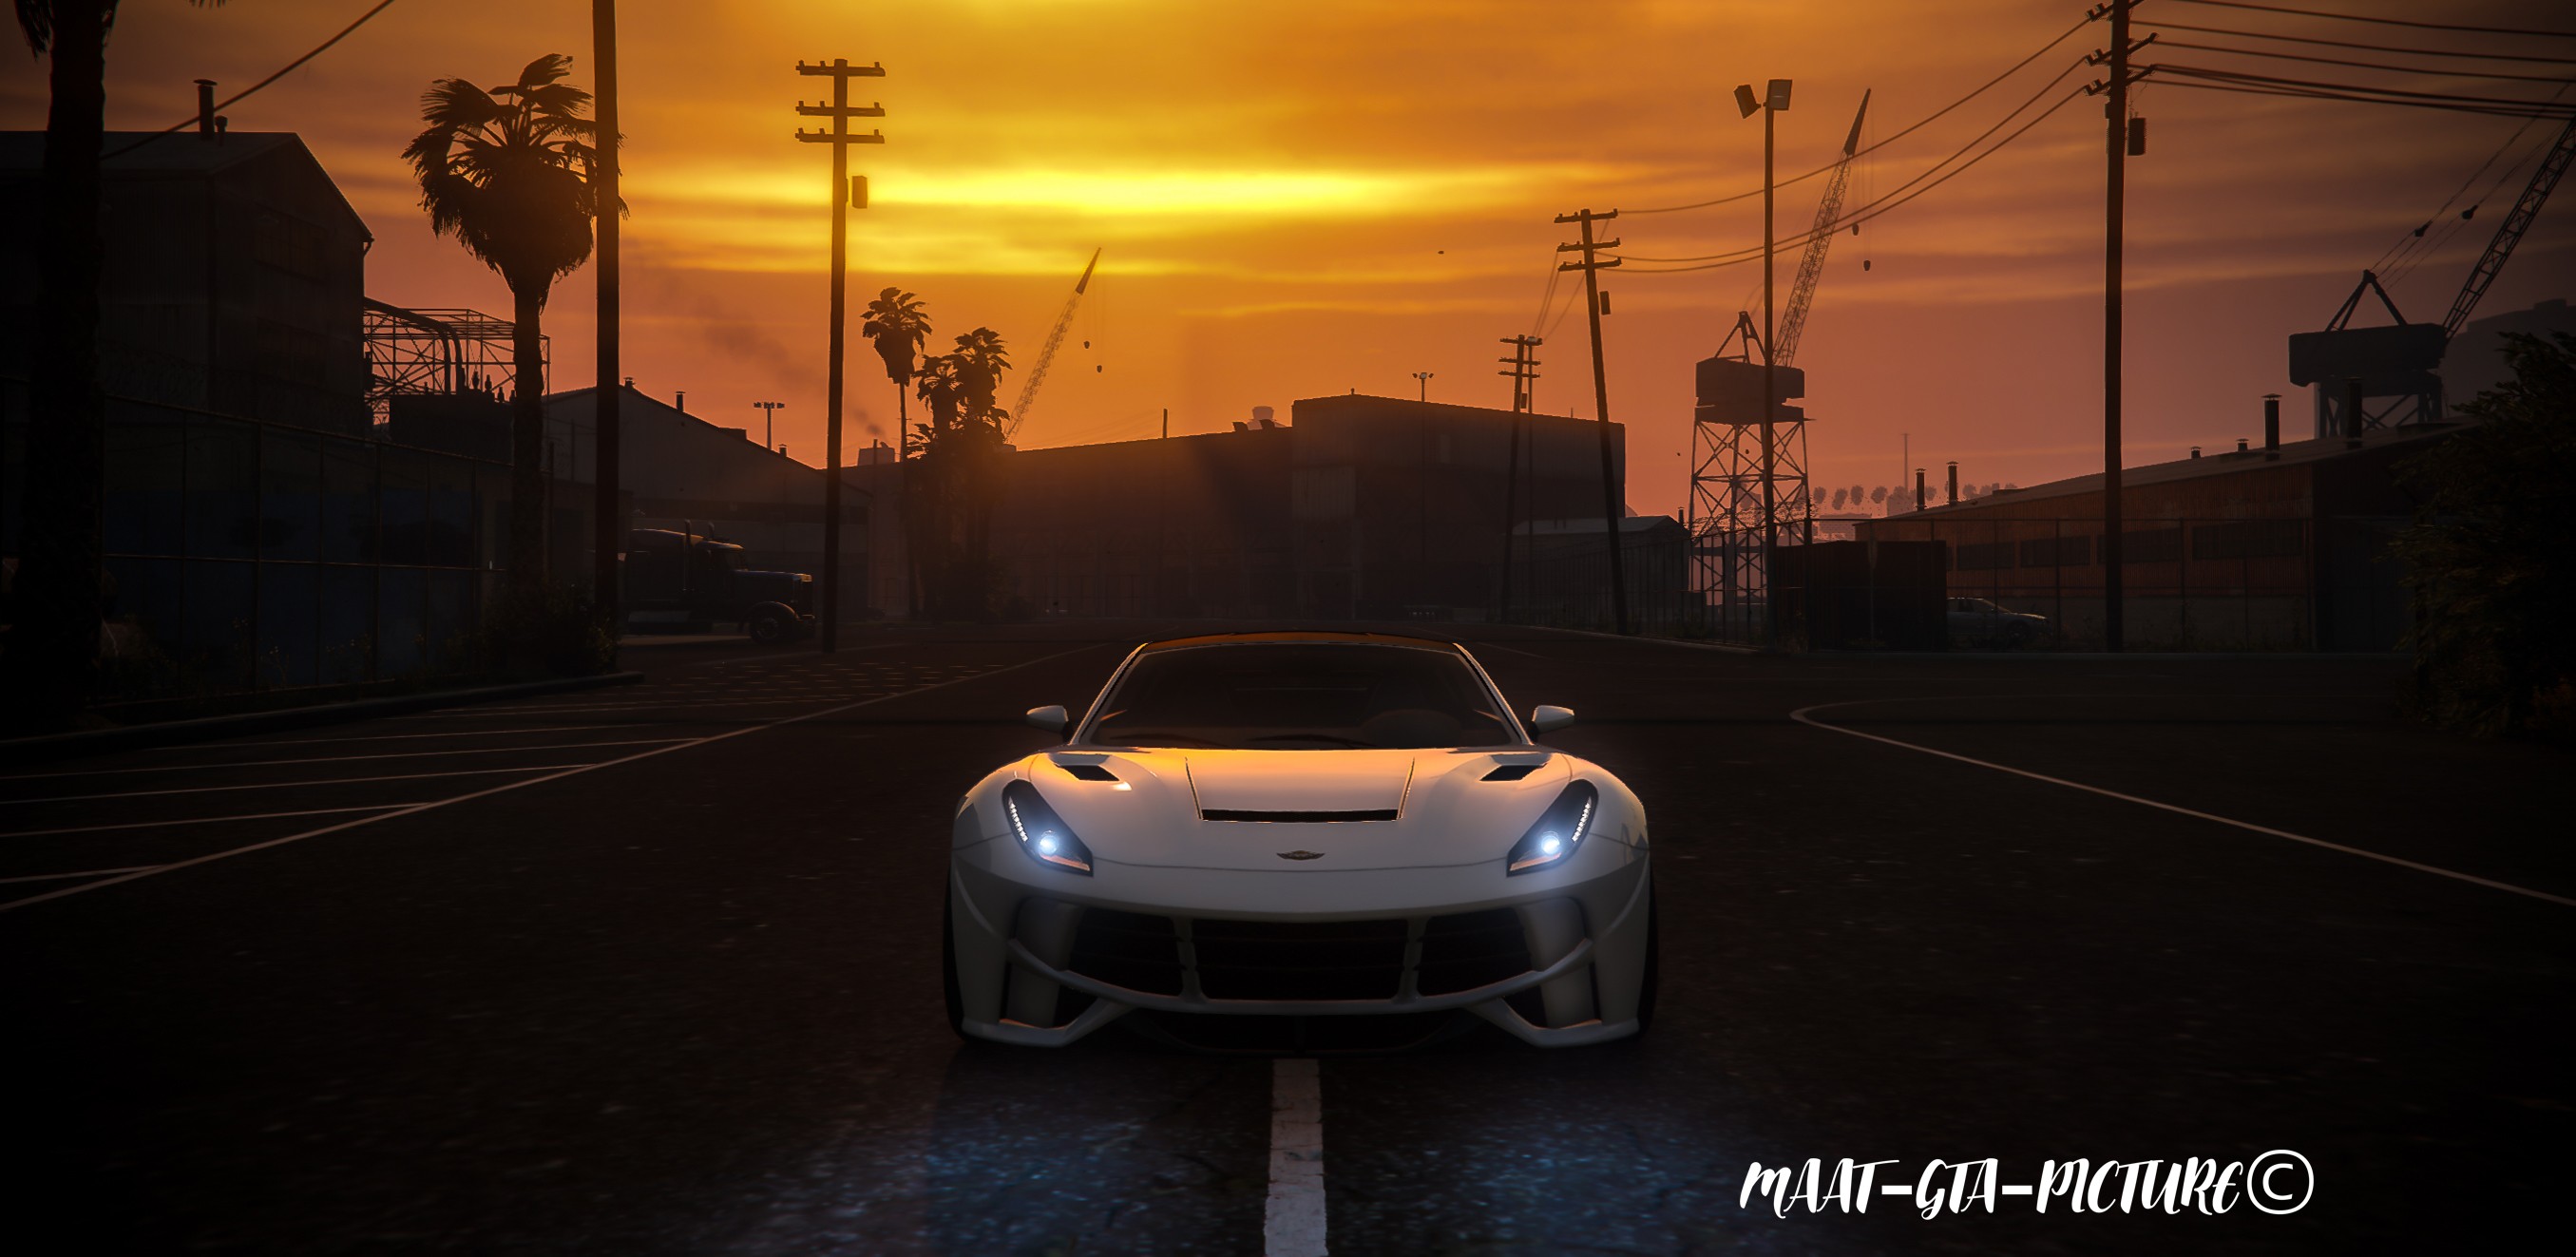 Grand Theft Auto V Gamers Photography Rockstar Games Car Photoshop Maatpicture 2711x1323